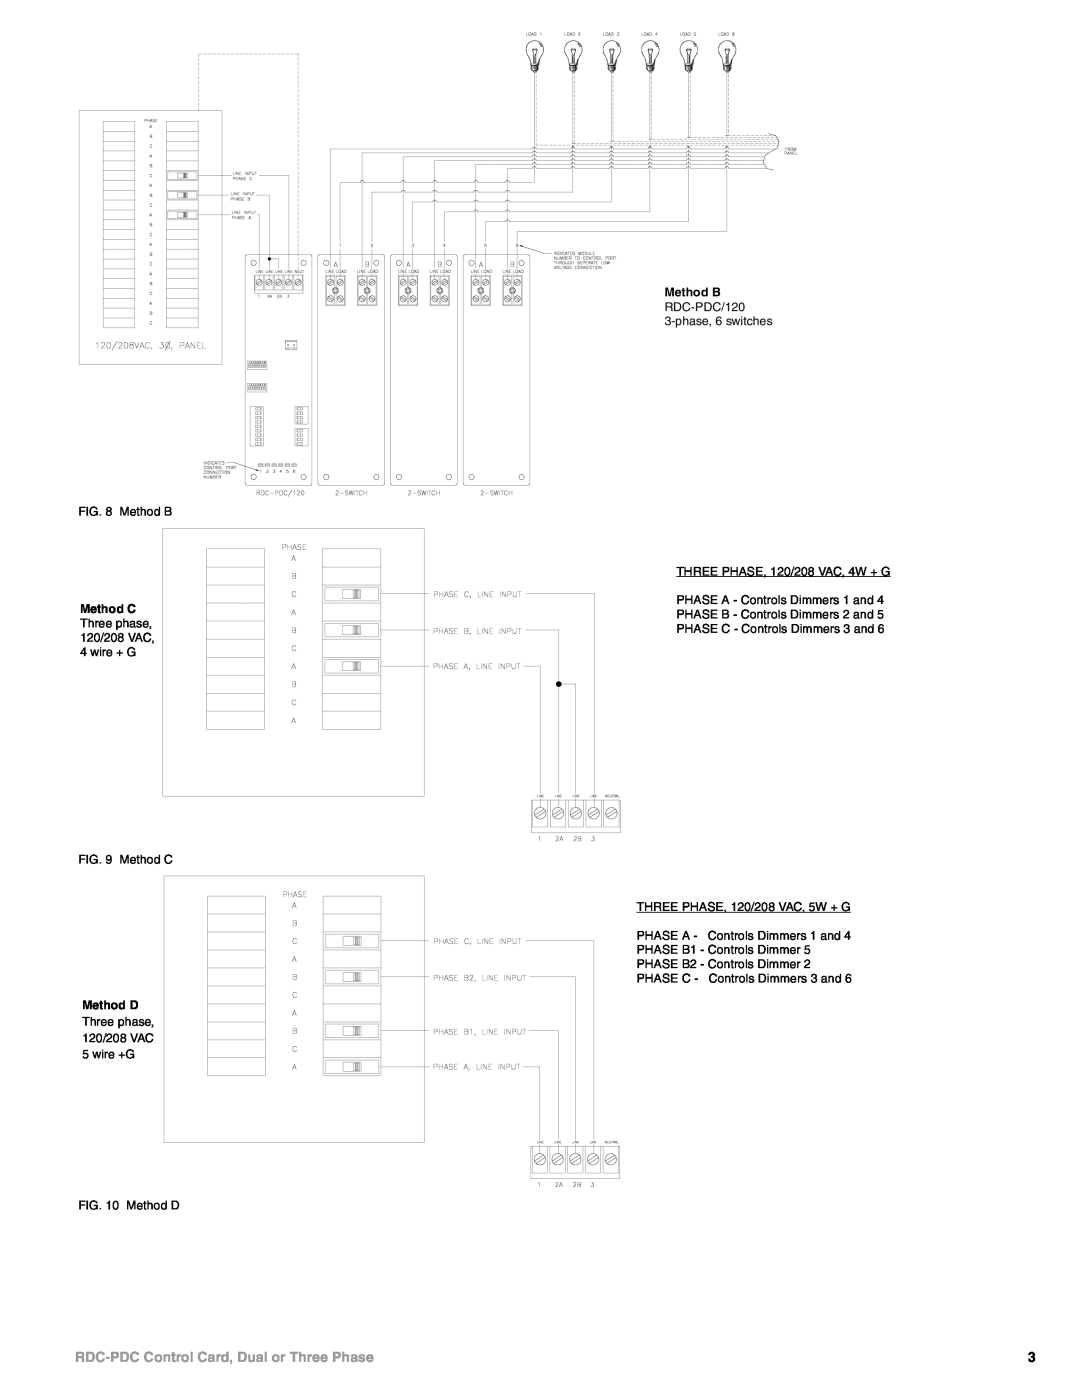 AMX specifications RDC-PDC Control Card, Dual or Three Phase, Method C, Method D, Method B 